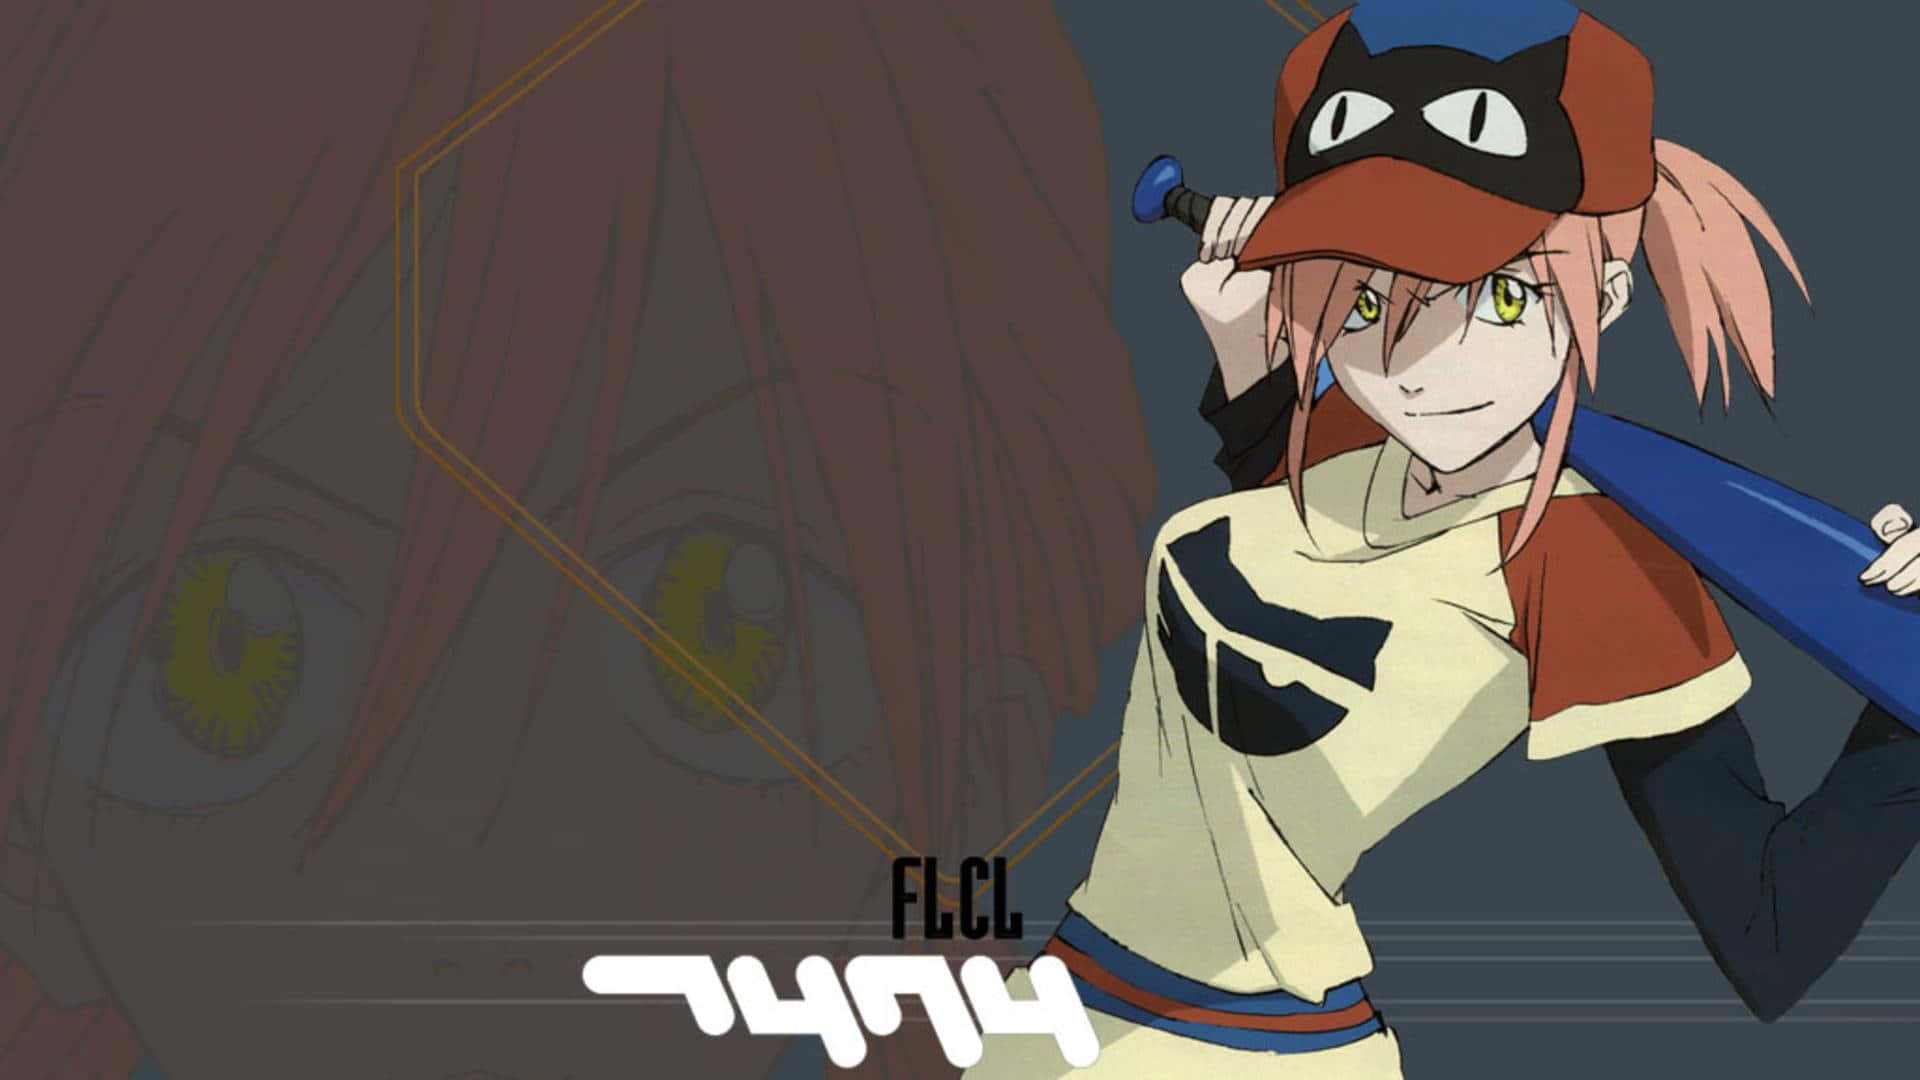 Haruko Haruhara in action from the anime FLCL Wallpaper